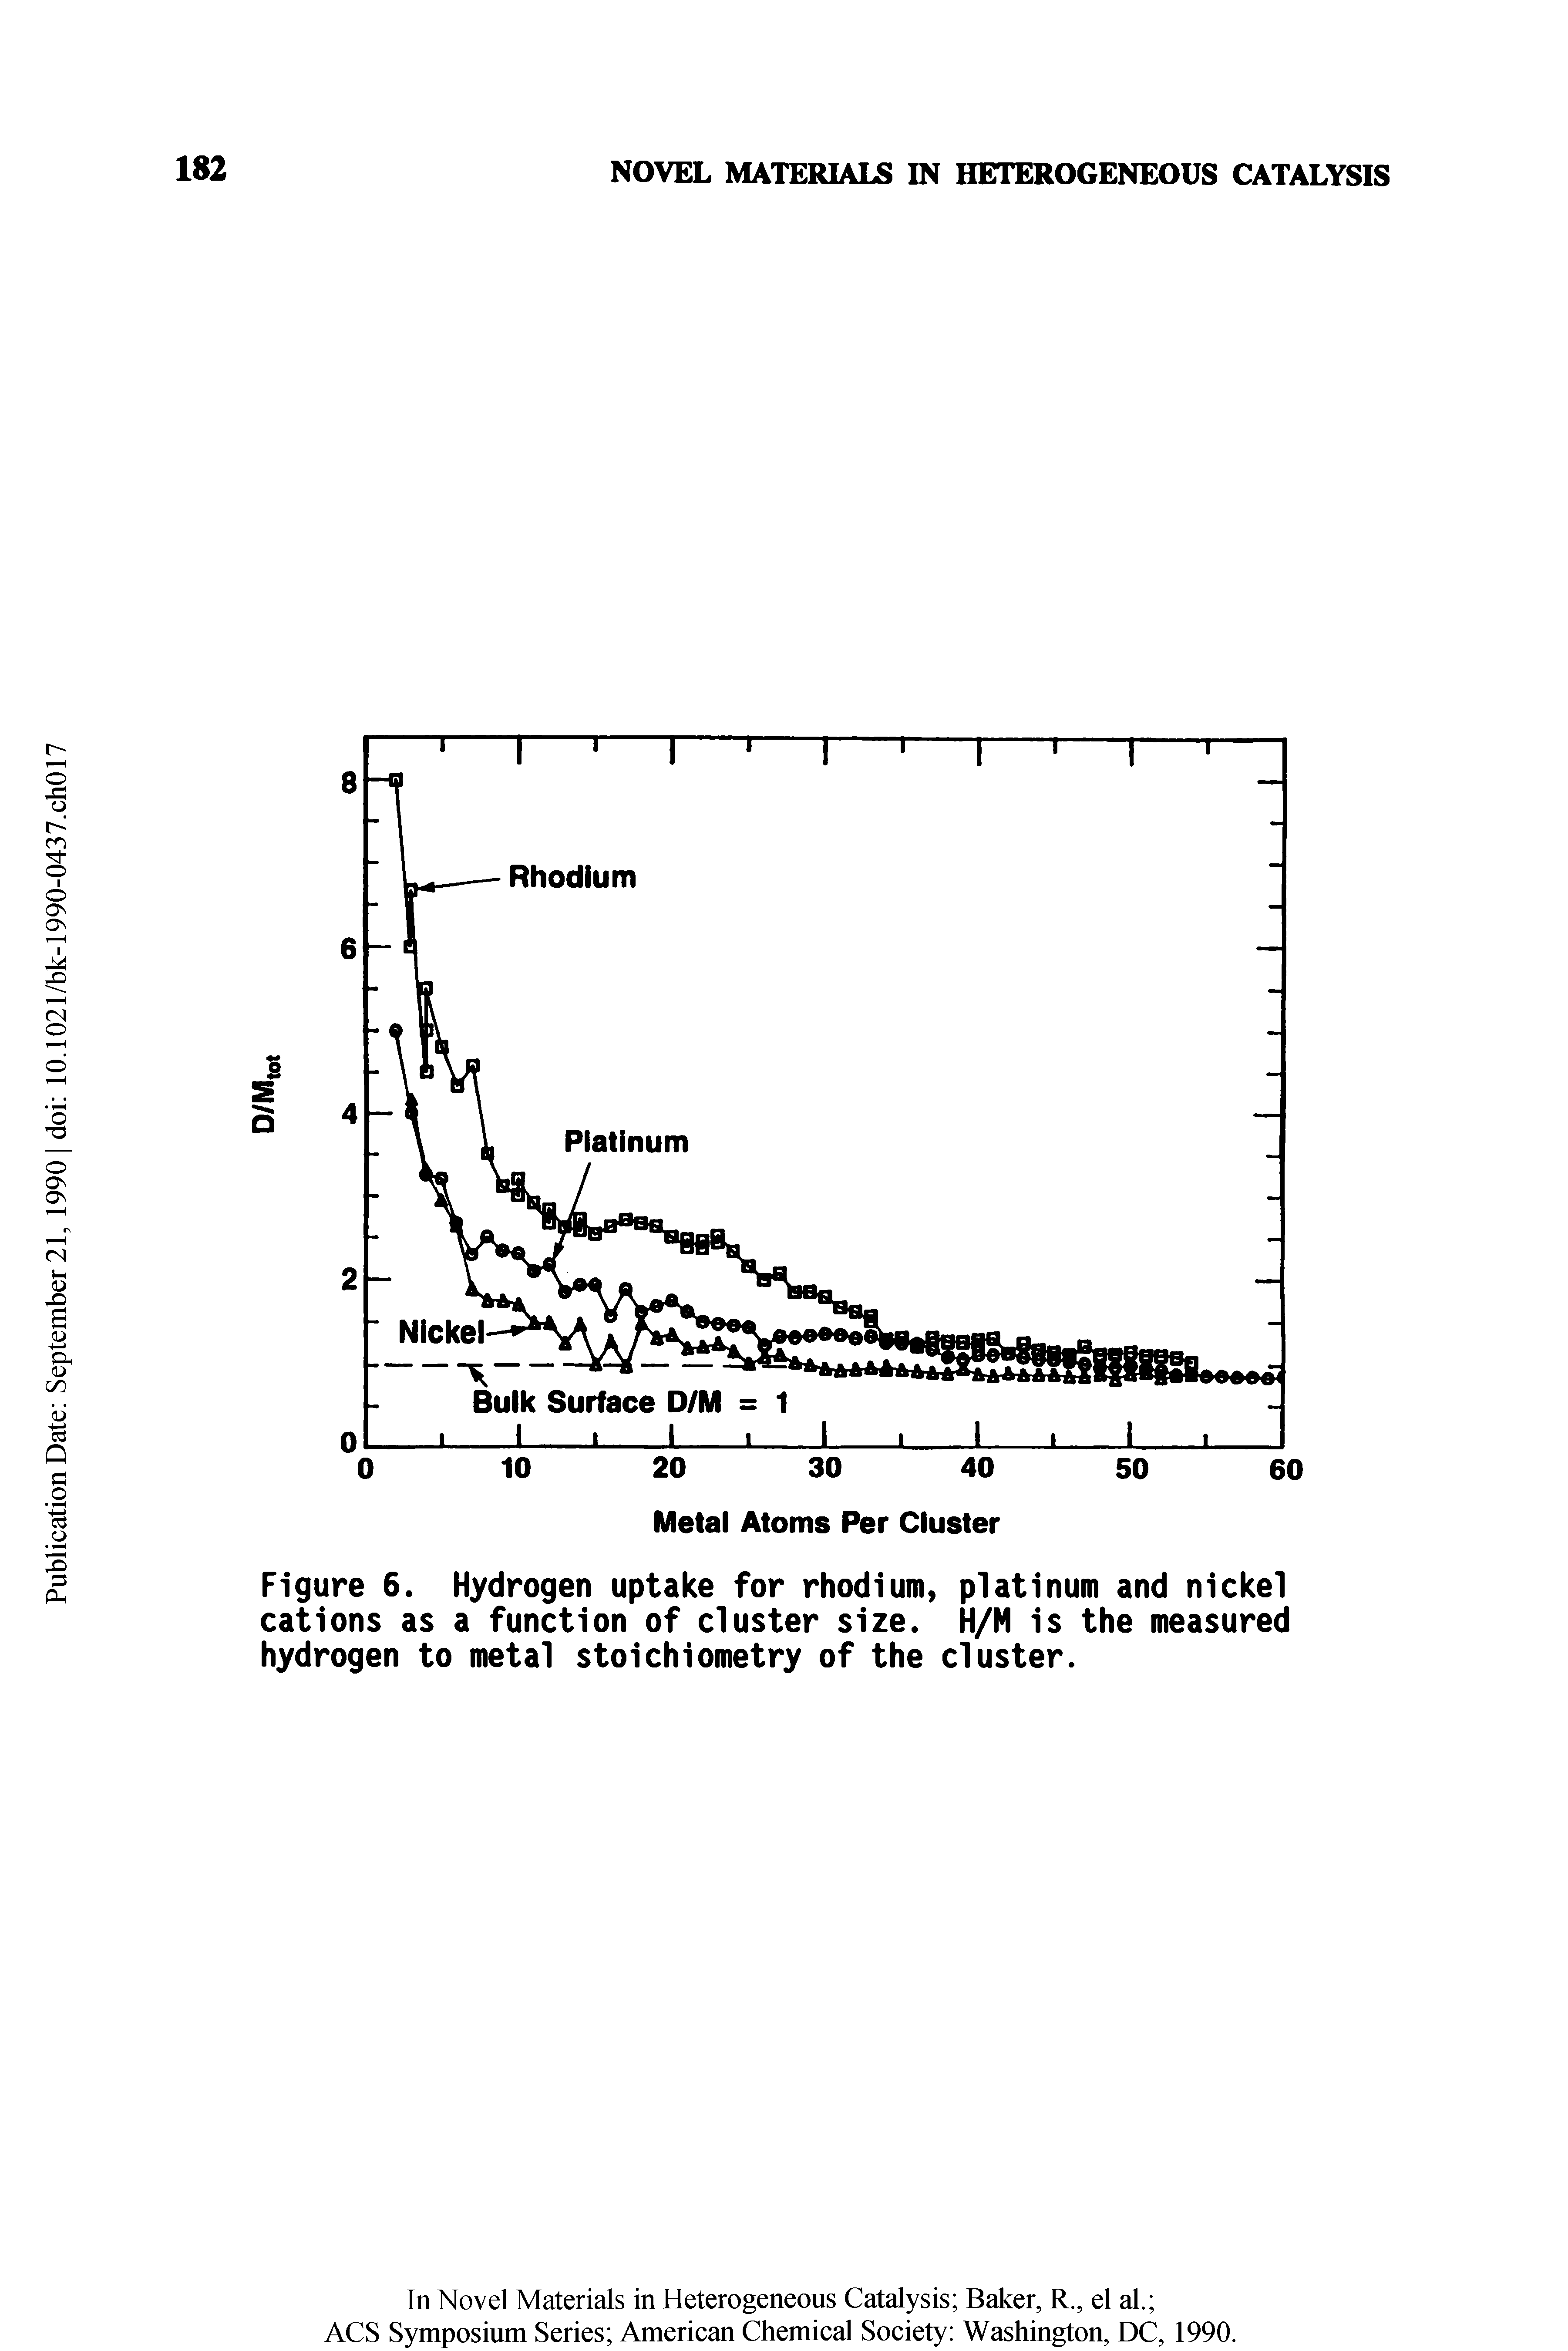 Figure 6. Hydrogen uptake for rhodium, platinum and nickel cations as a function of duster size. H/M is the measured hydrogen to metal stoichiometry of the duster.